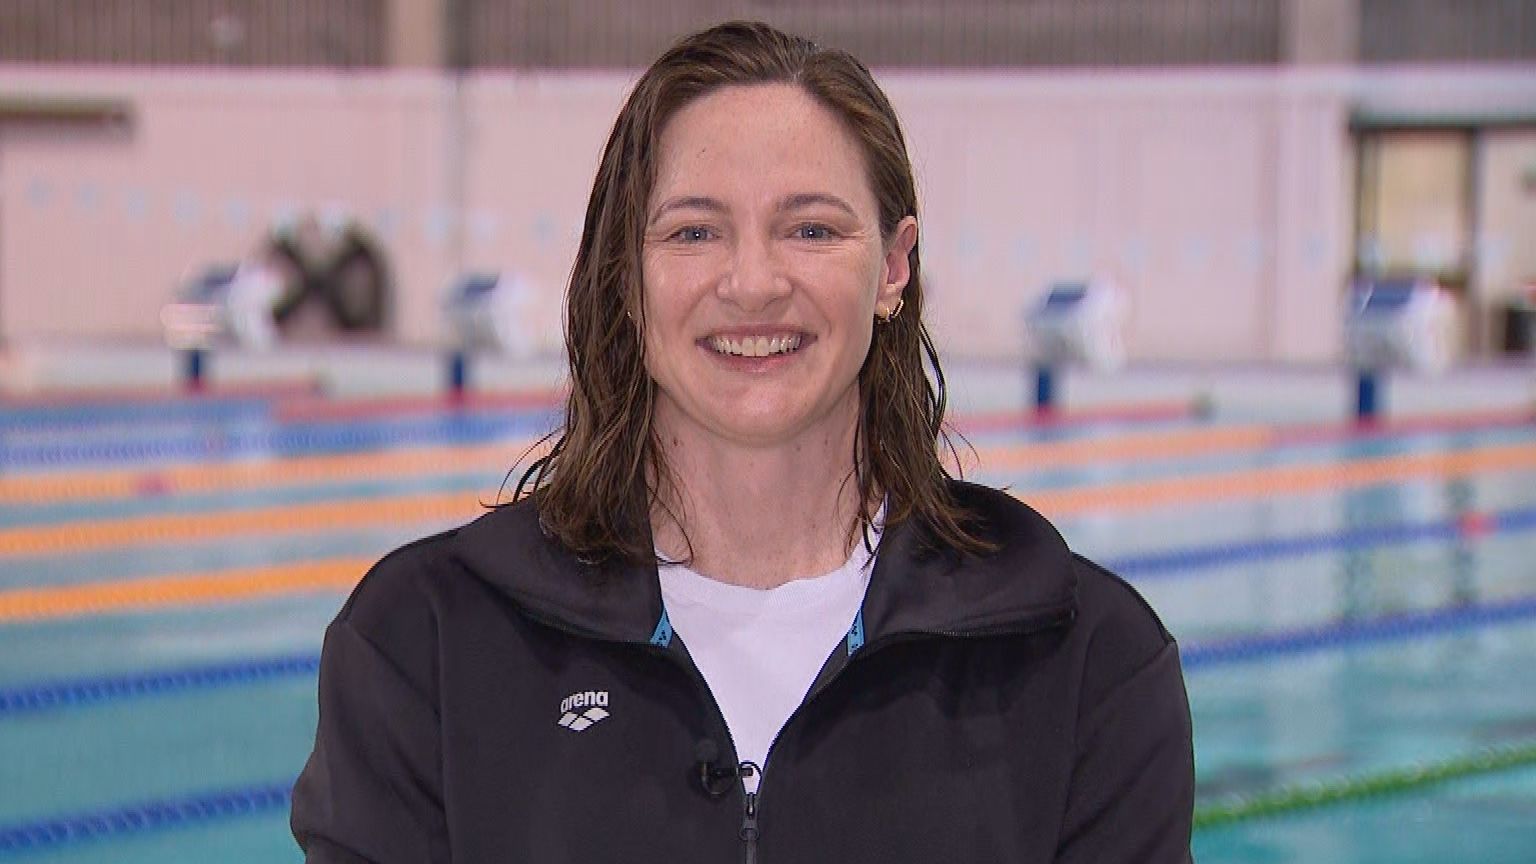 Four-time Olympian Cate Campbell rips 'sore losers' USA for churlish act at World Aquatic Championships